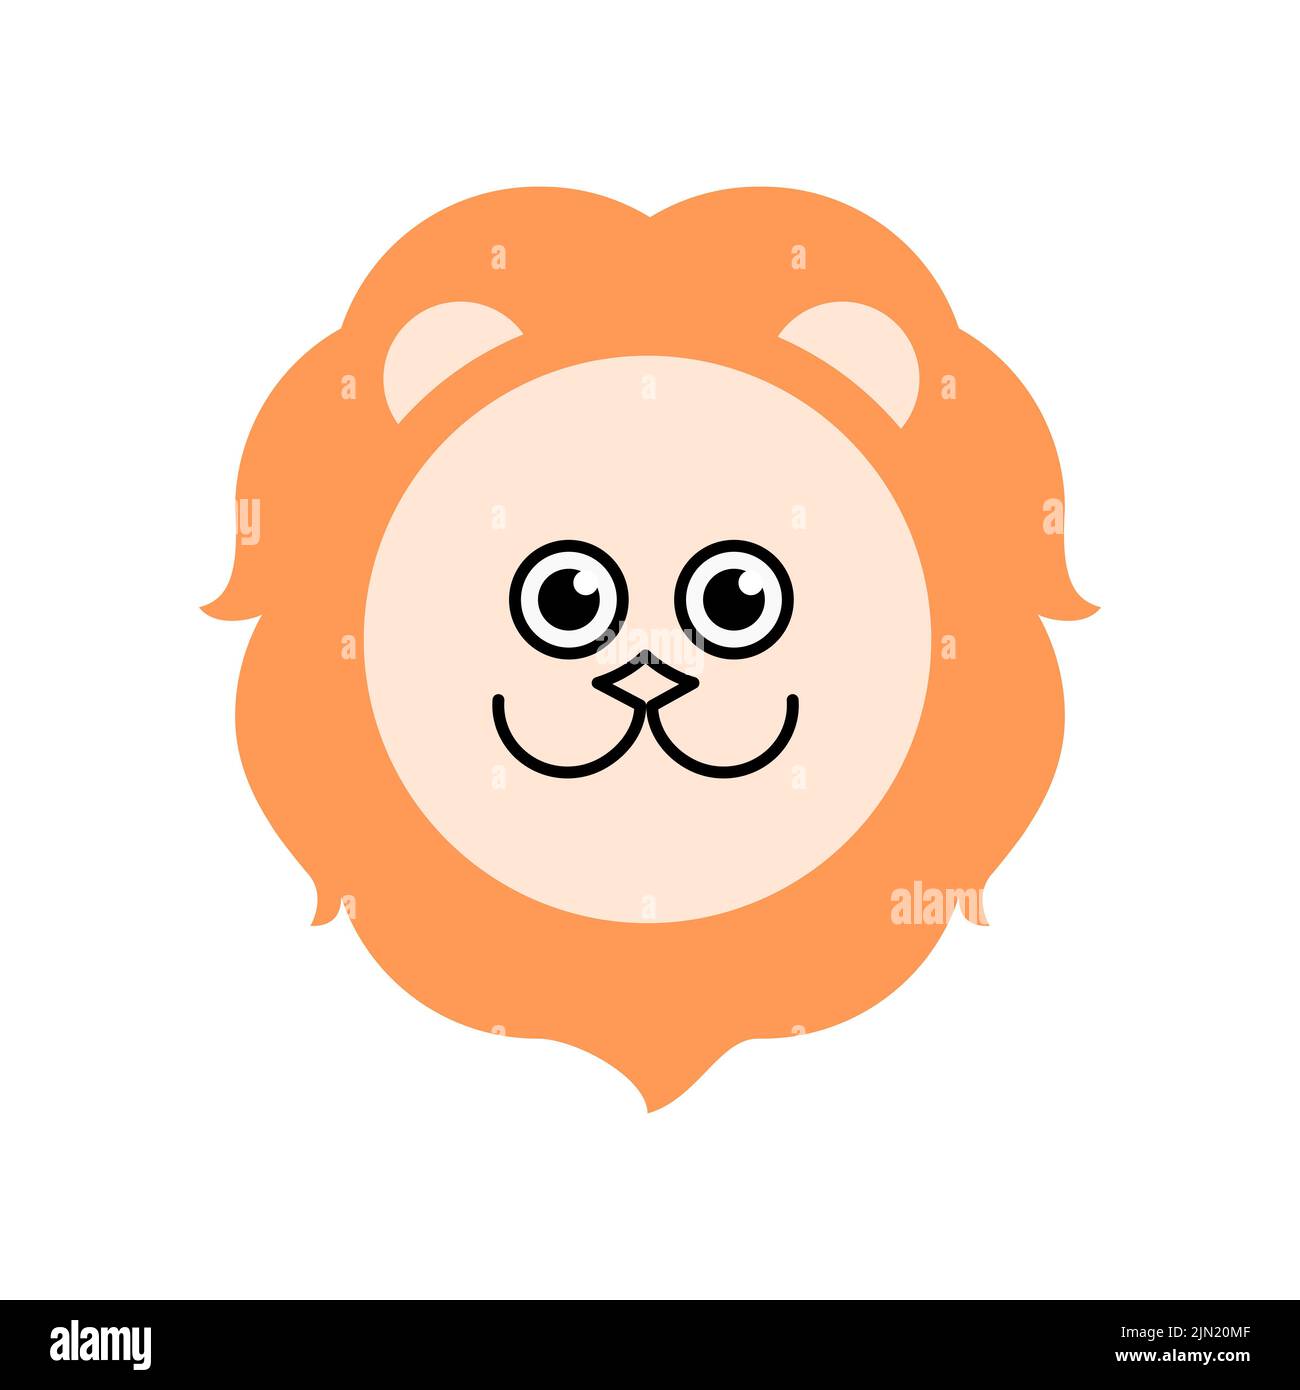 2D illustration of Cute Lion Head logo for print, card, banner, web, video etc. Stock Photo